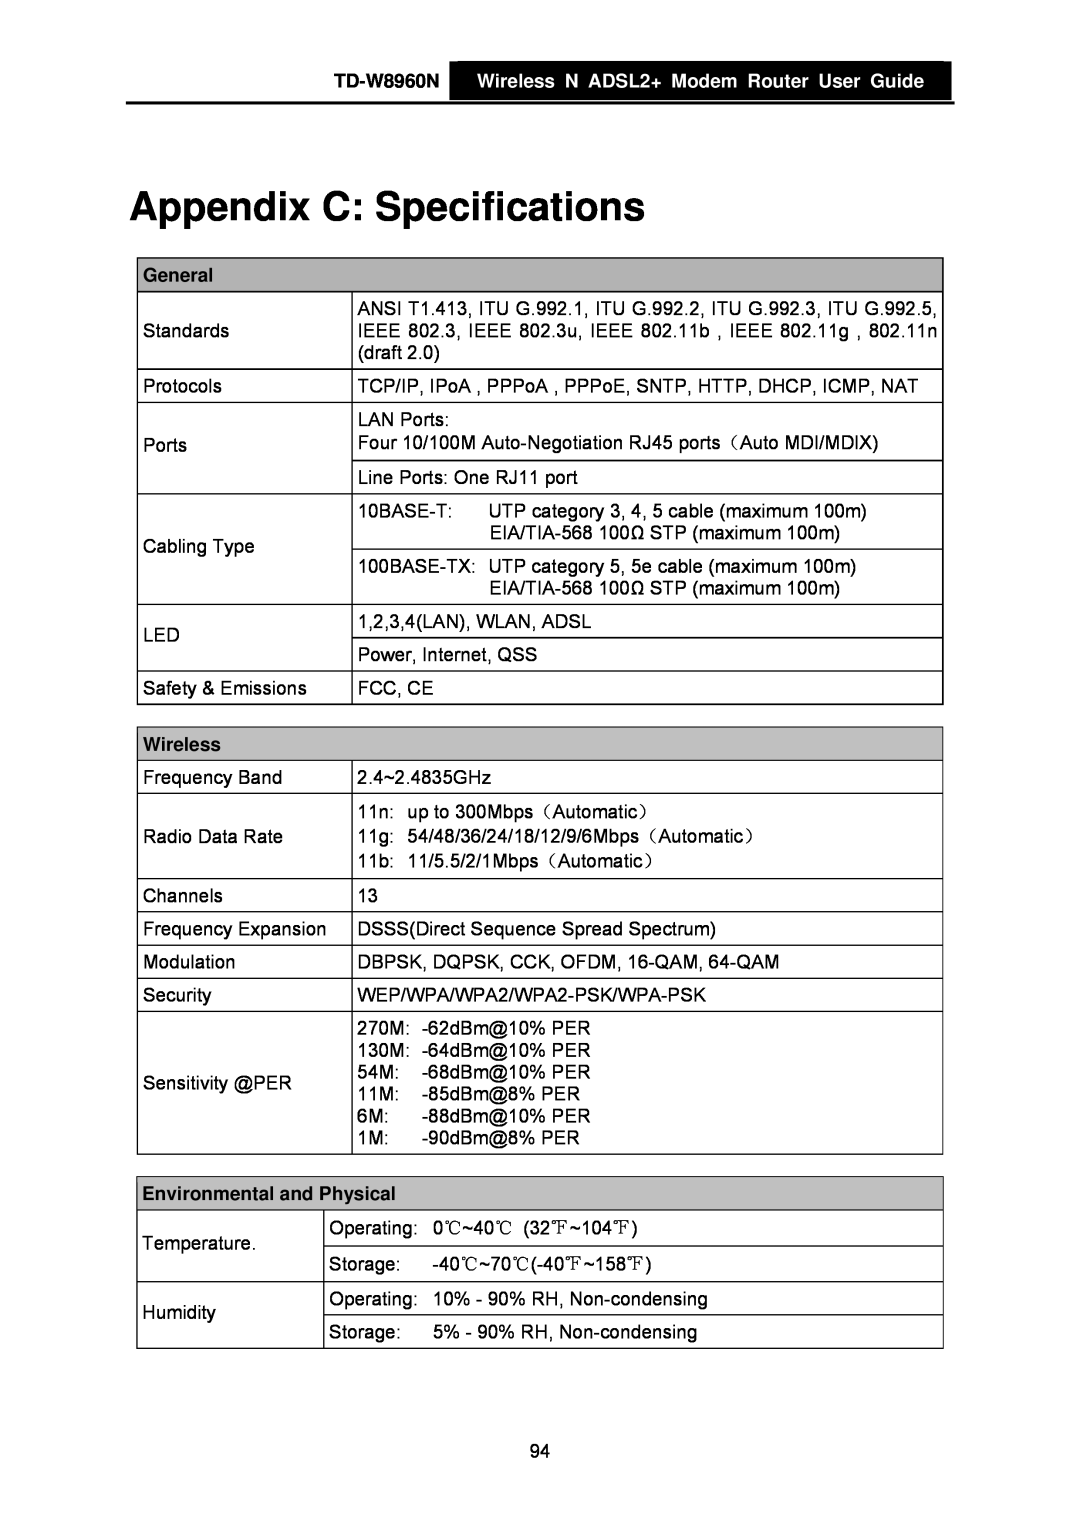 TP-Link manual Appendix C Specifications, TD-W8960N Wireless N ADSL2+ Modem Router User Guide, General 